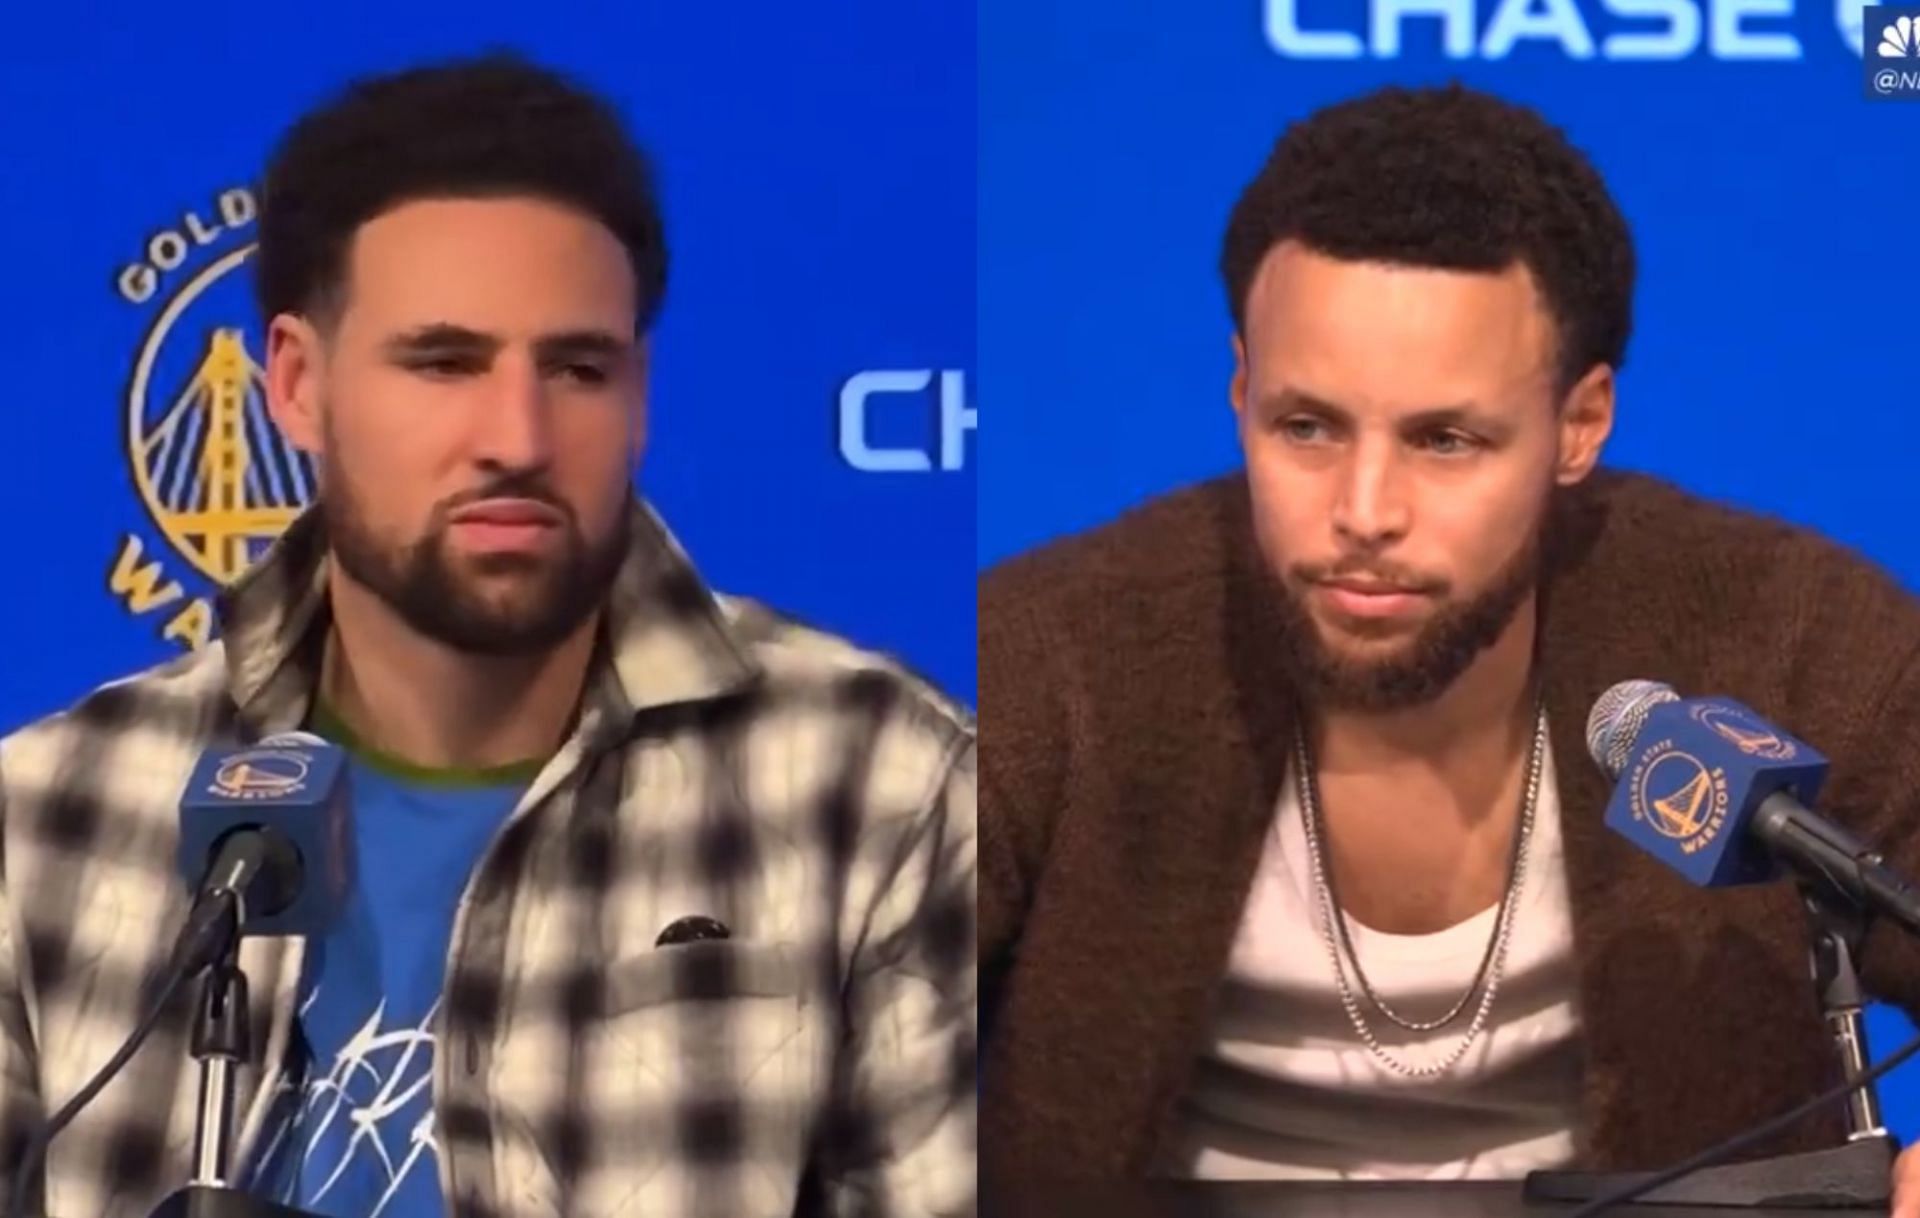 Steph Curry and Klay Thompson have different reactions to the boobirds at the Chase 1 Center